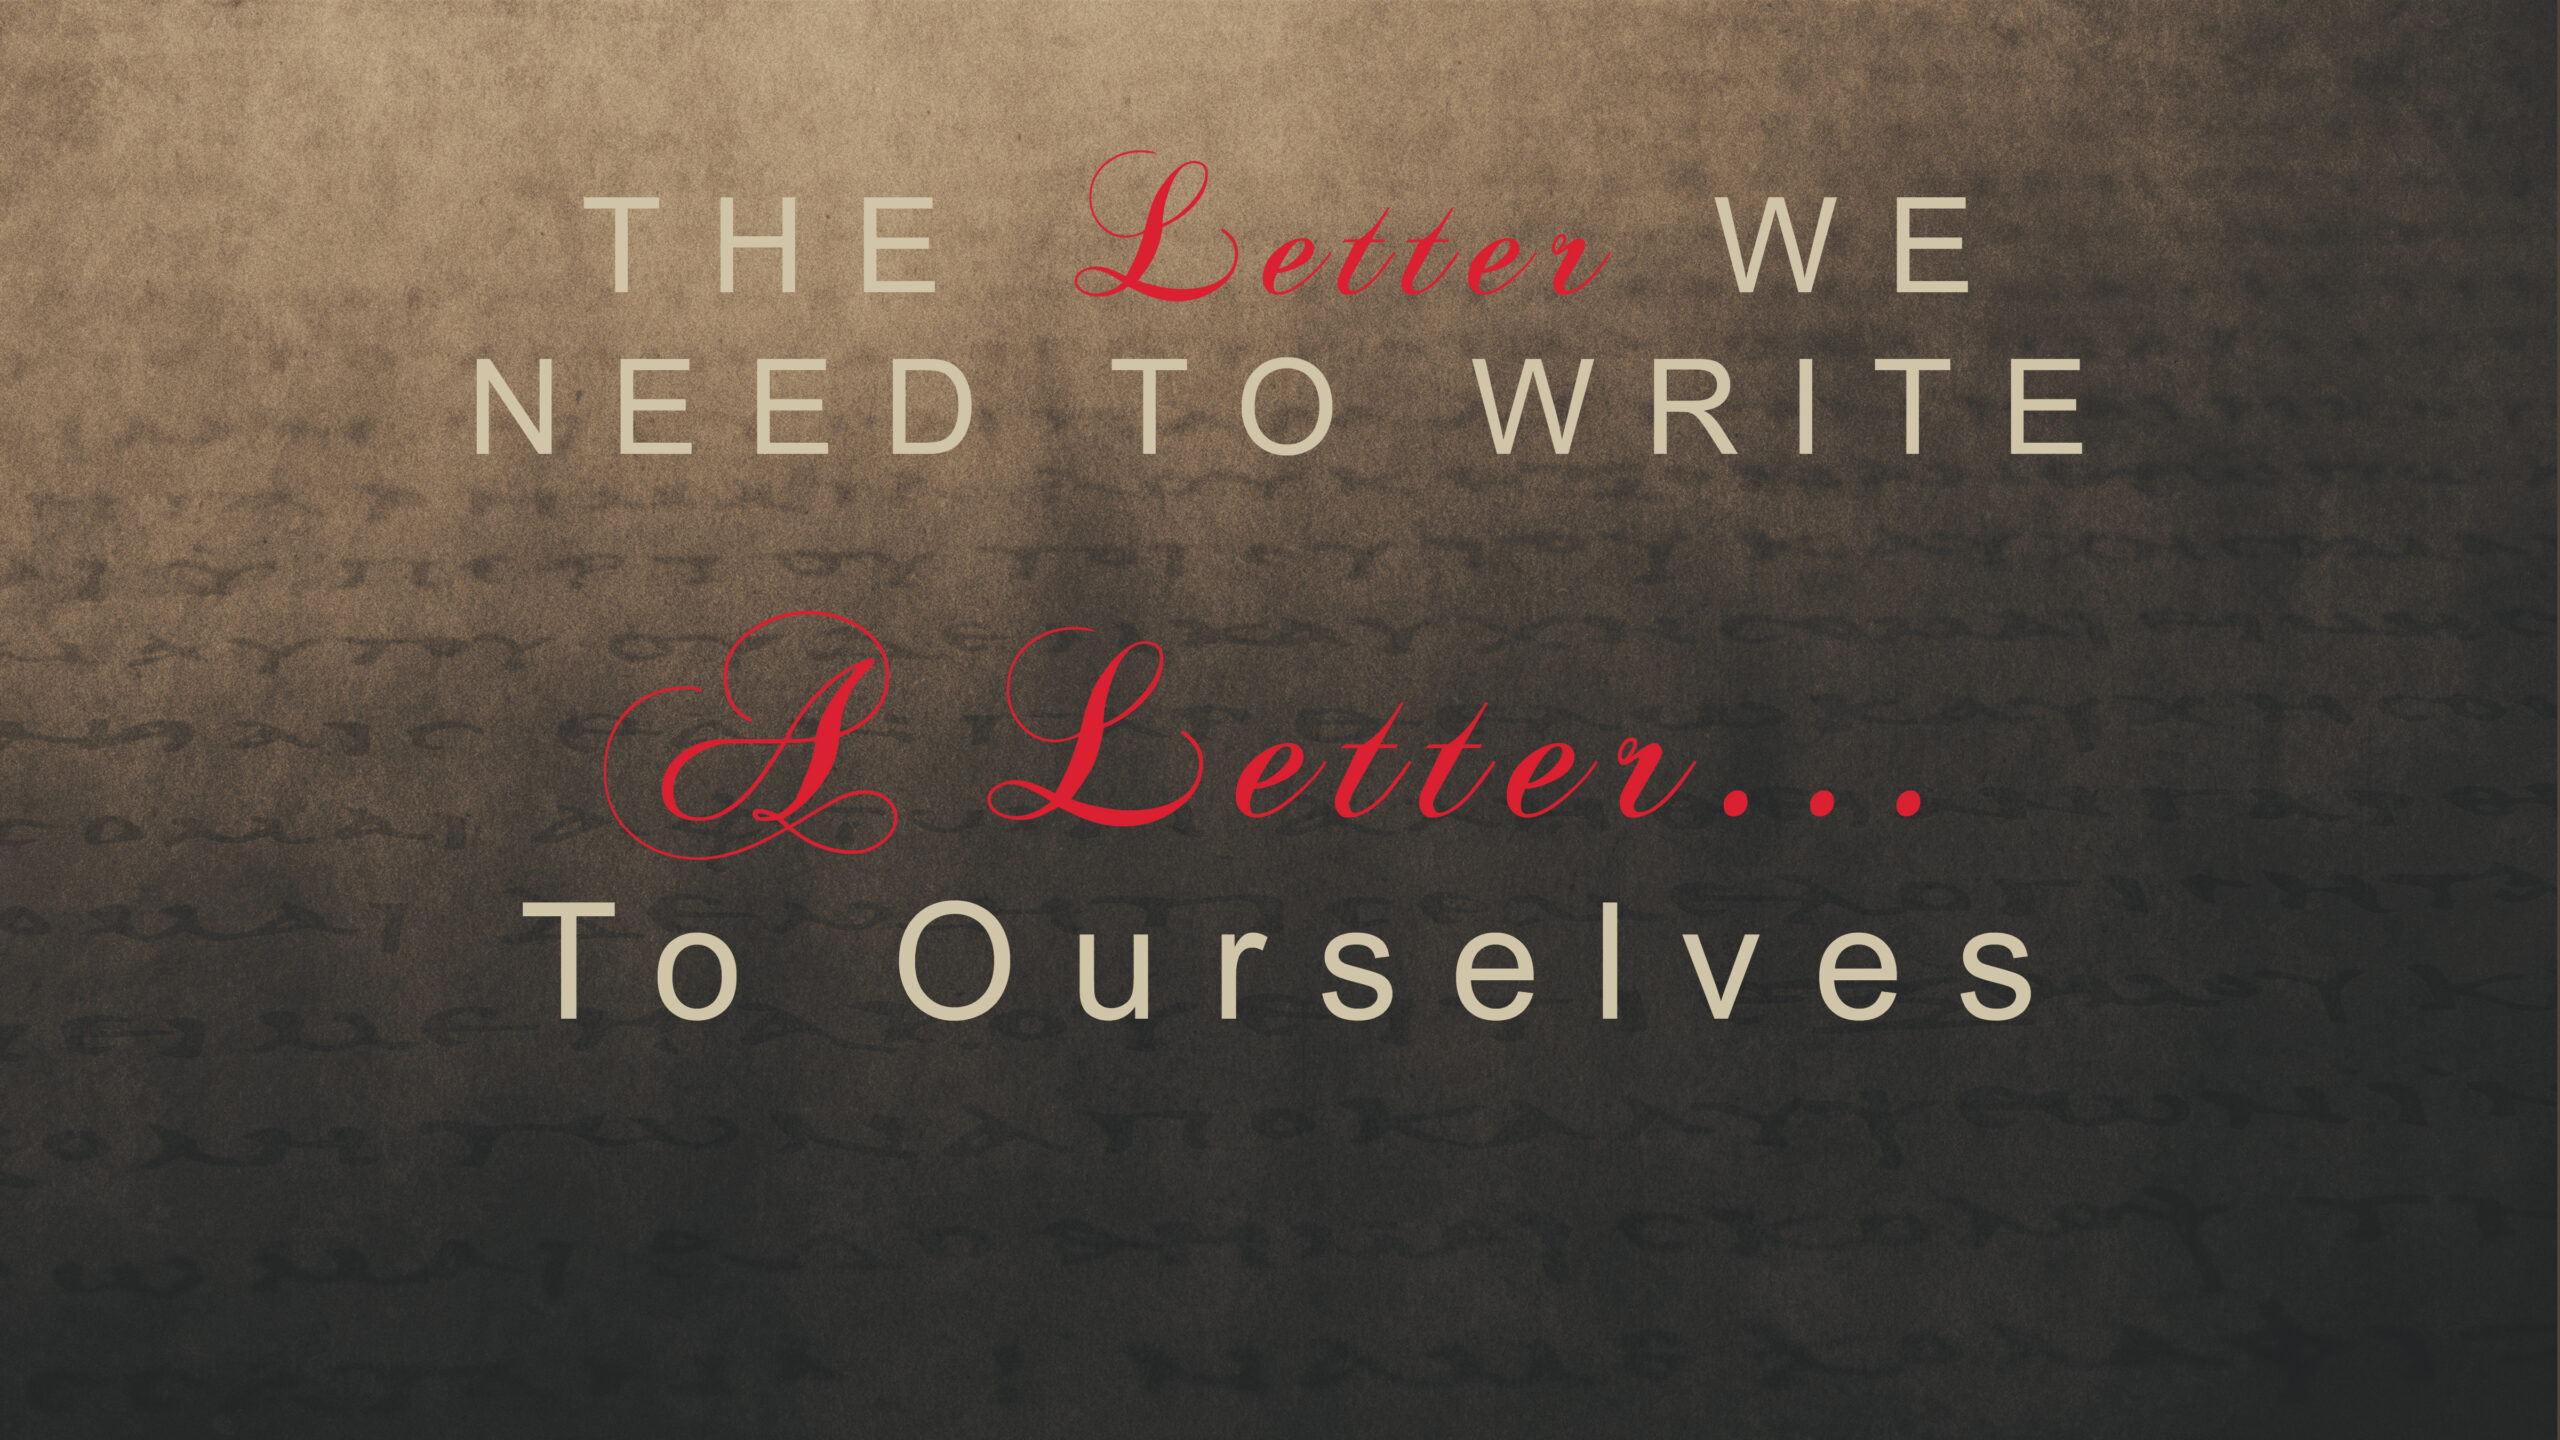 The Letter We Nee to Write PART 6 “A Letter…To Ourselves” (THRIVE)